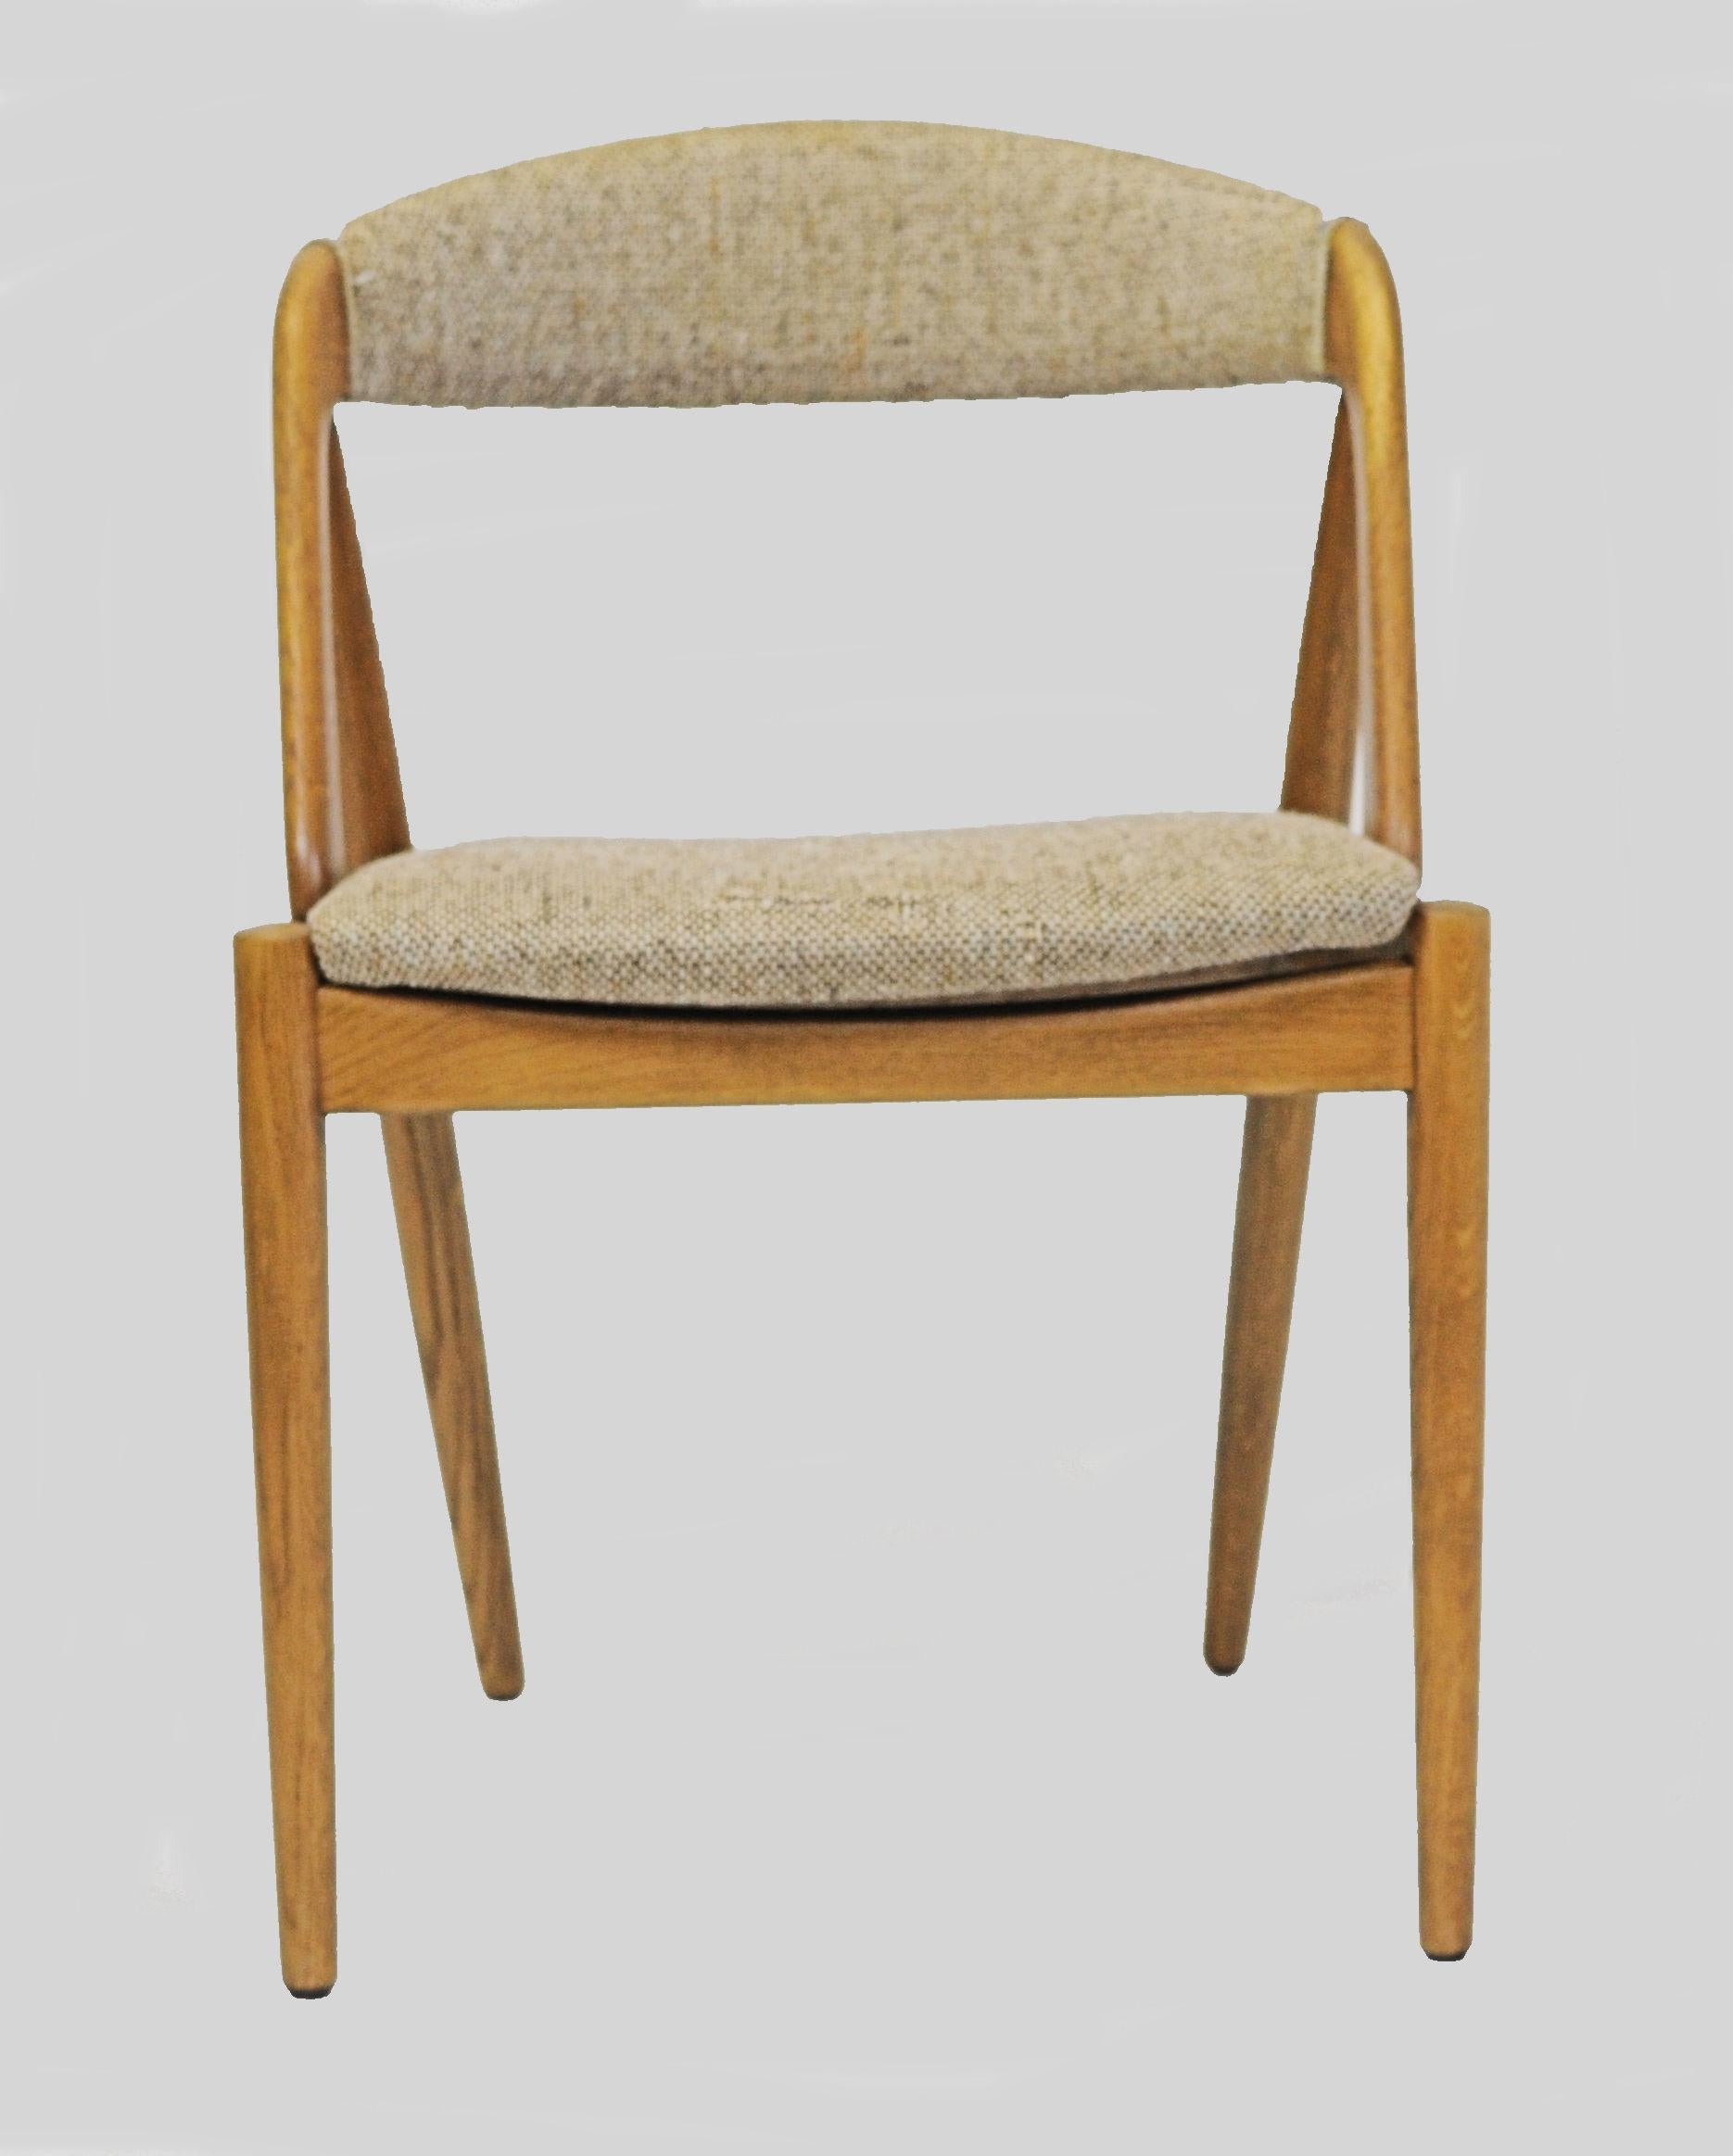 Set of Eight Fully Restored Kai Kristiansen Oak Dining Chairs, Custom UpholsterySet of eight model 31 dining chairs in oak designed by Kai Kristiansen for Schou Andersens Møbelfabrik in 1956.

The model 31 chaie - often called the A frame chair was